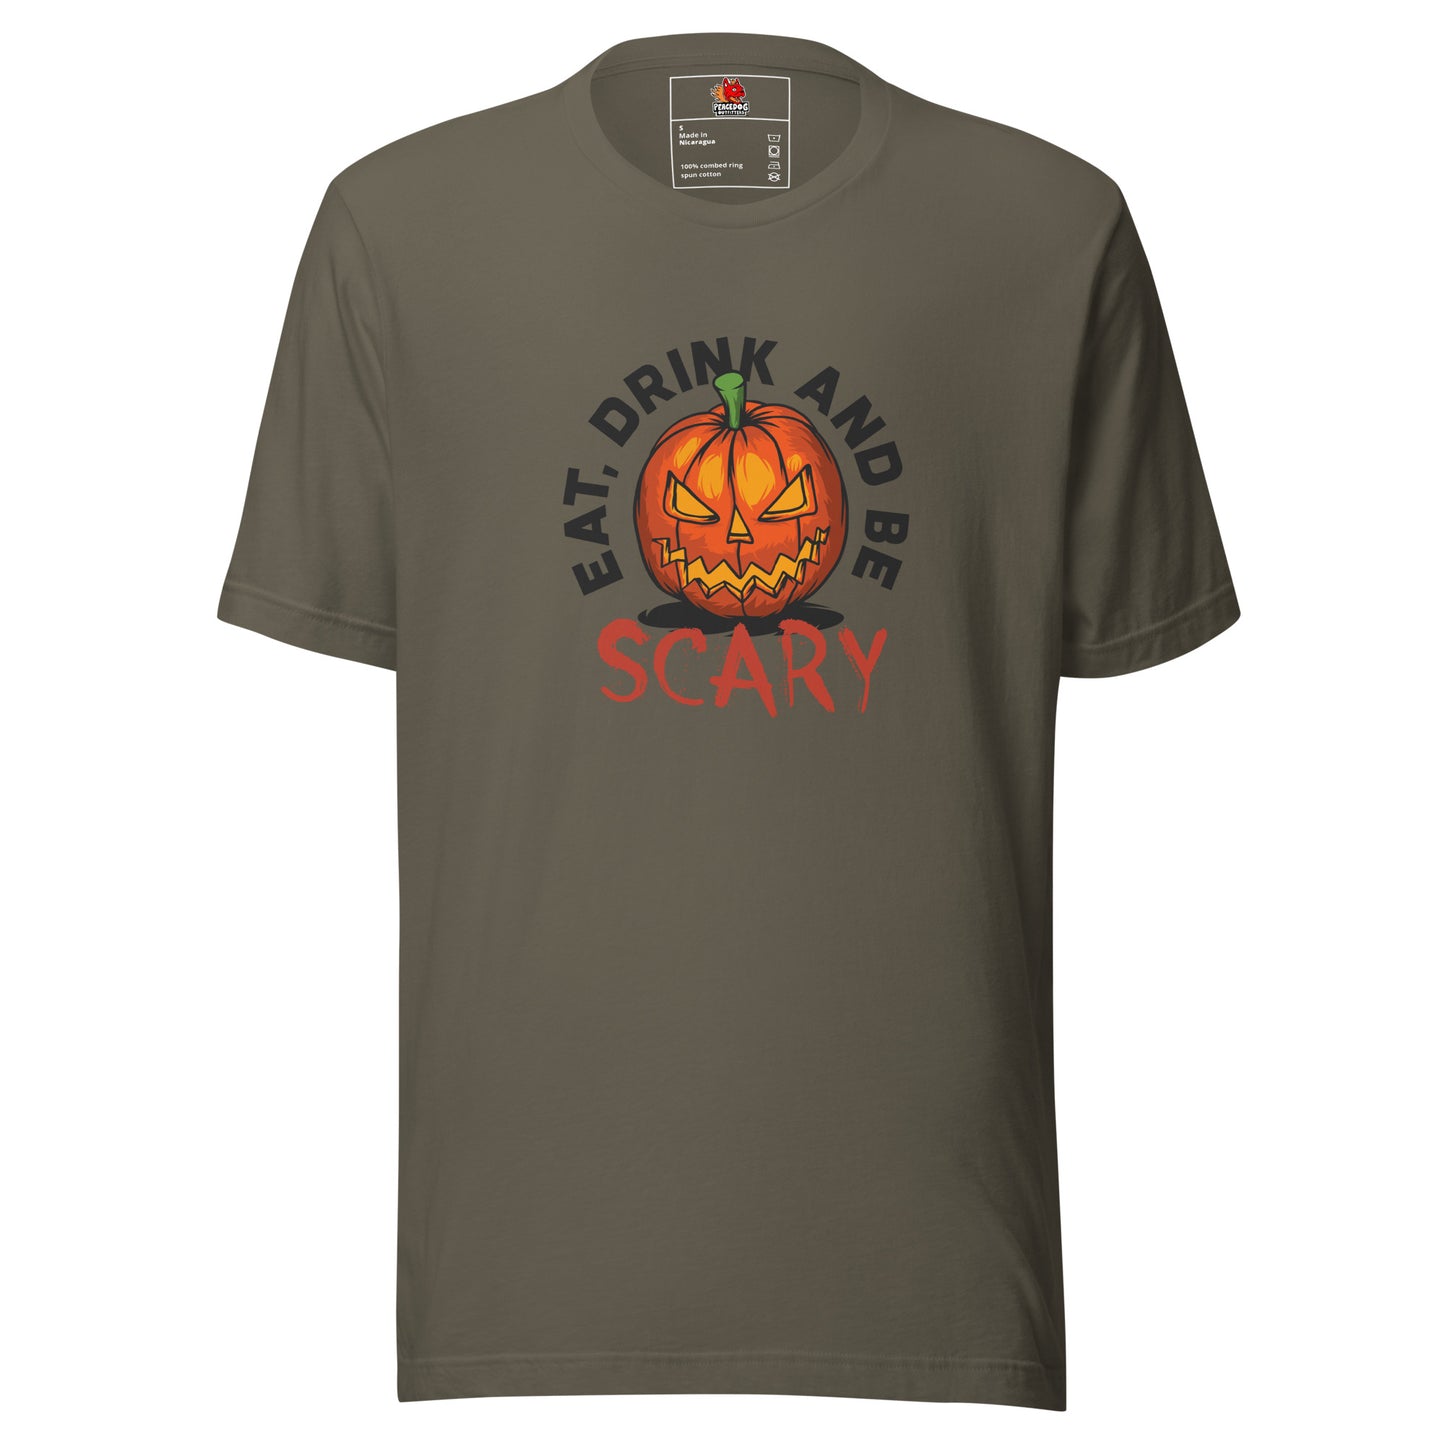 Eat, Drink, and be Scary T-shirt